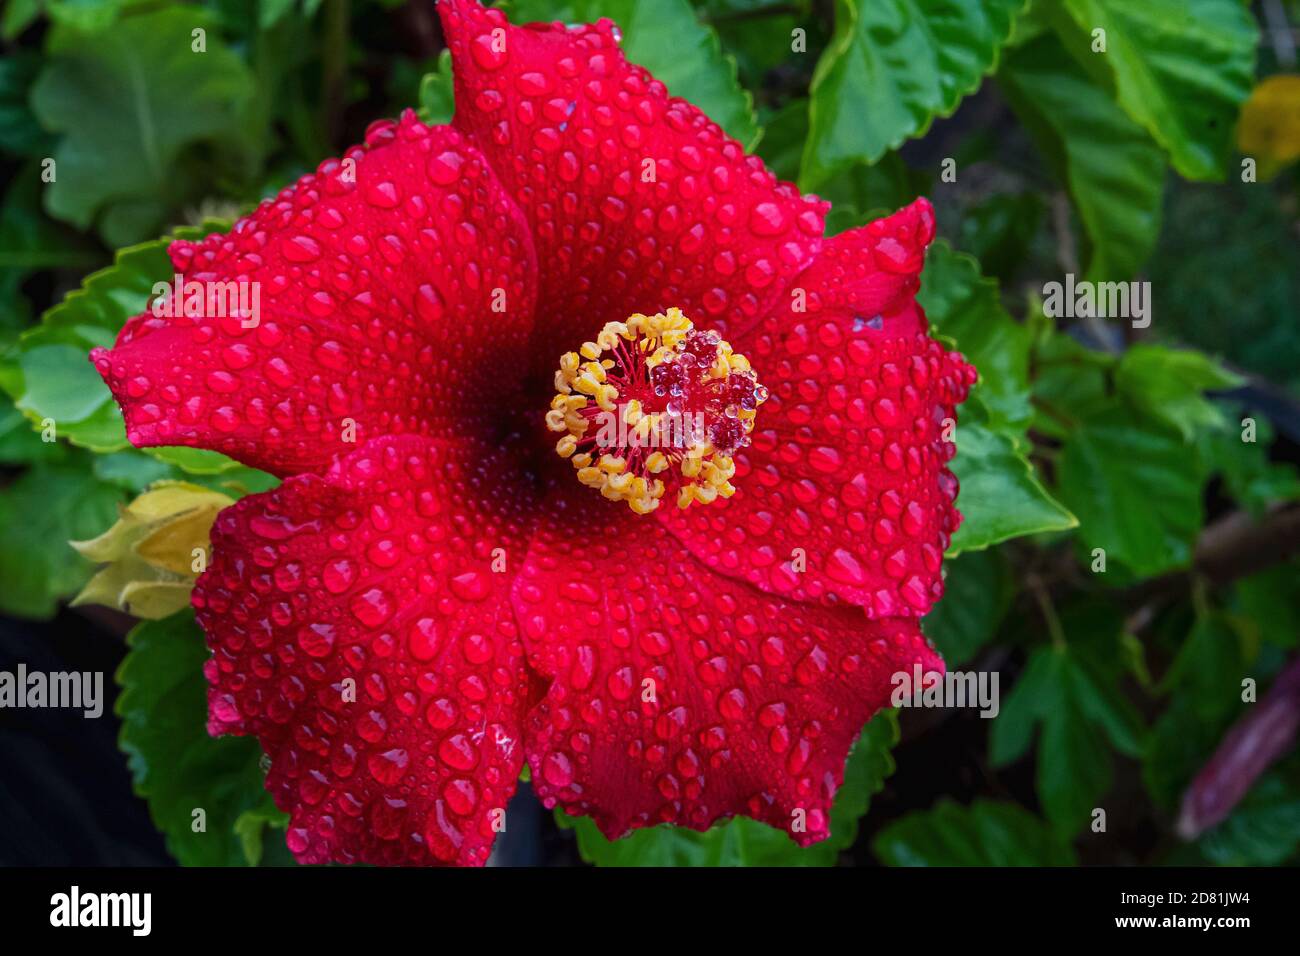 Red garden hibiscus with raindrop pattern Stock Photo